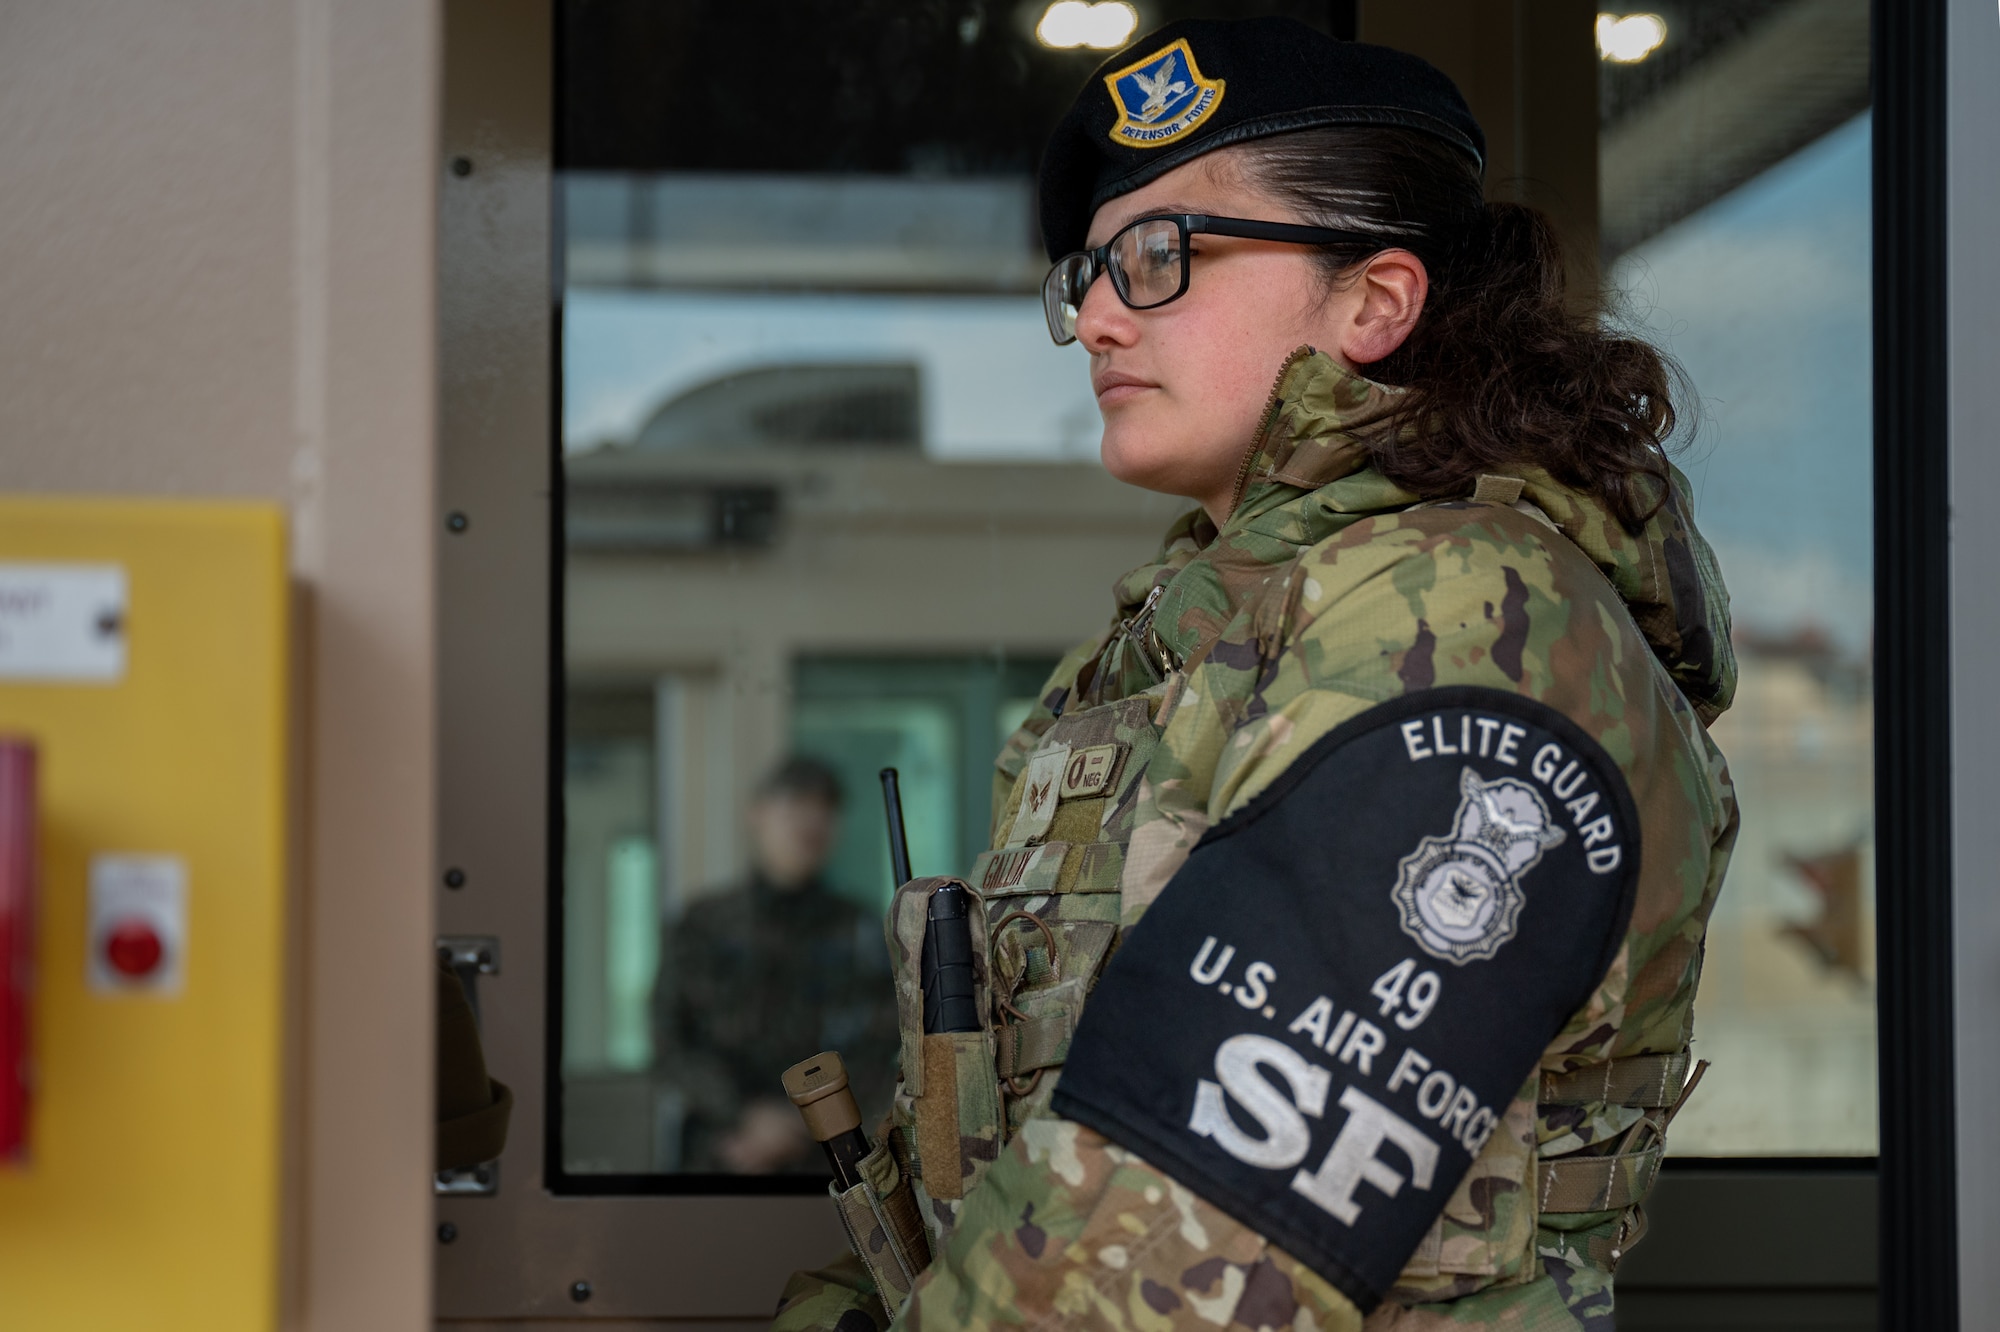 U.S. Air Force Senior Airman Samyra Gallik, 51st Security Forces Squadron elite guard area supervisor, stands guard at Osan Air Base, Republic of Korea, March 21, 2024. Elite guards undergo specialized training to identify forged documents and personal cues indicative of individuals seeking unauthorized entry with potentially harmful intentions into the installation. (U.S. Air Force photo by Senior Airman Brittany Russell)